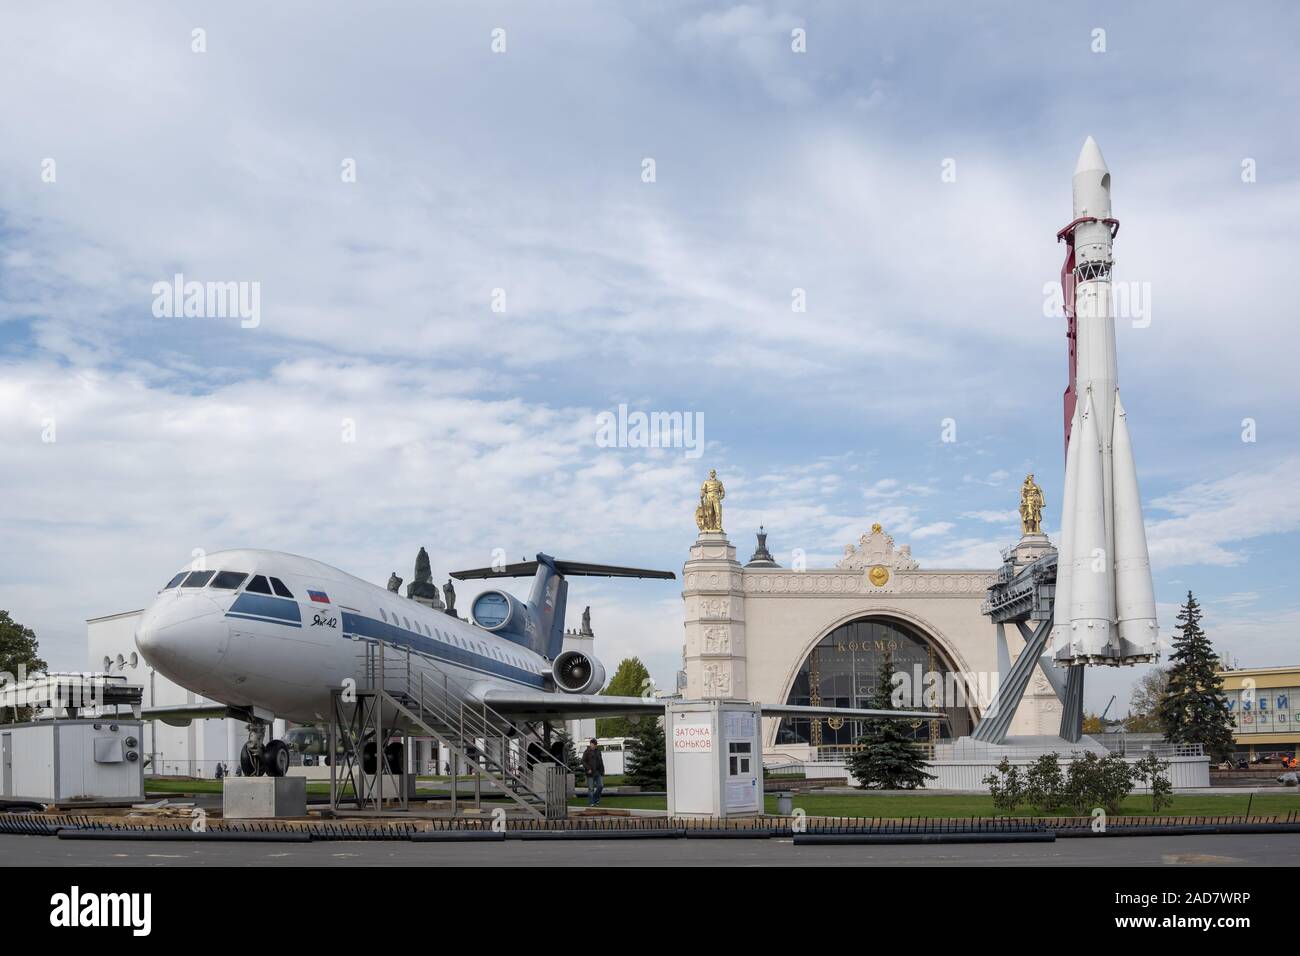 Airplane yak-42 and Rocket Vostok on in front of the pavilion Cosmos. Exhibition Center, Moscow, Rus Stock Photo